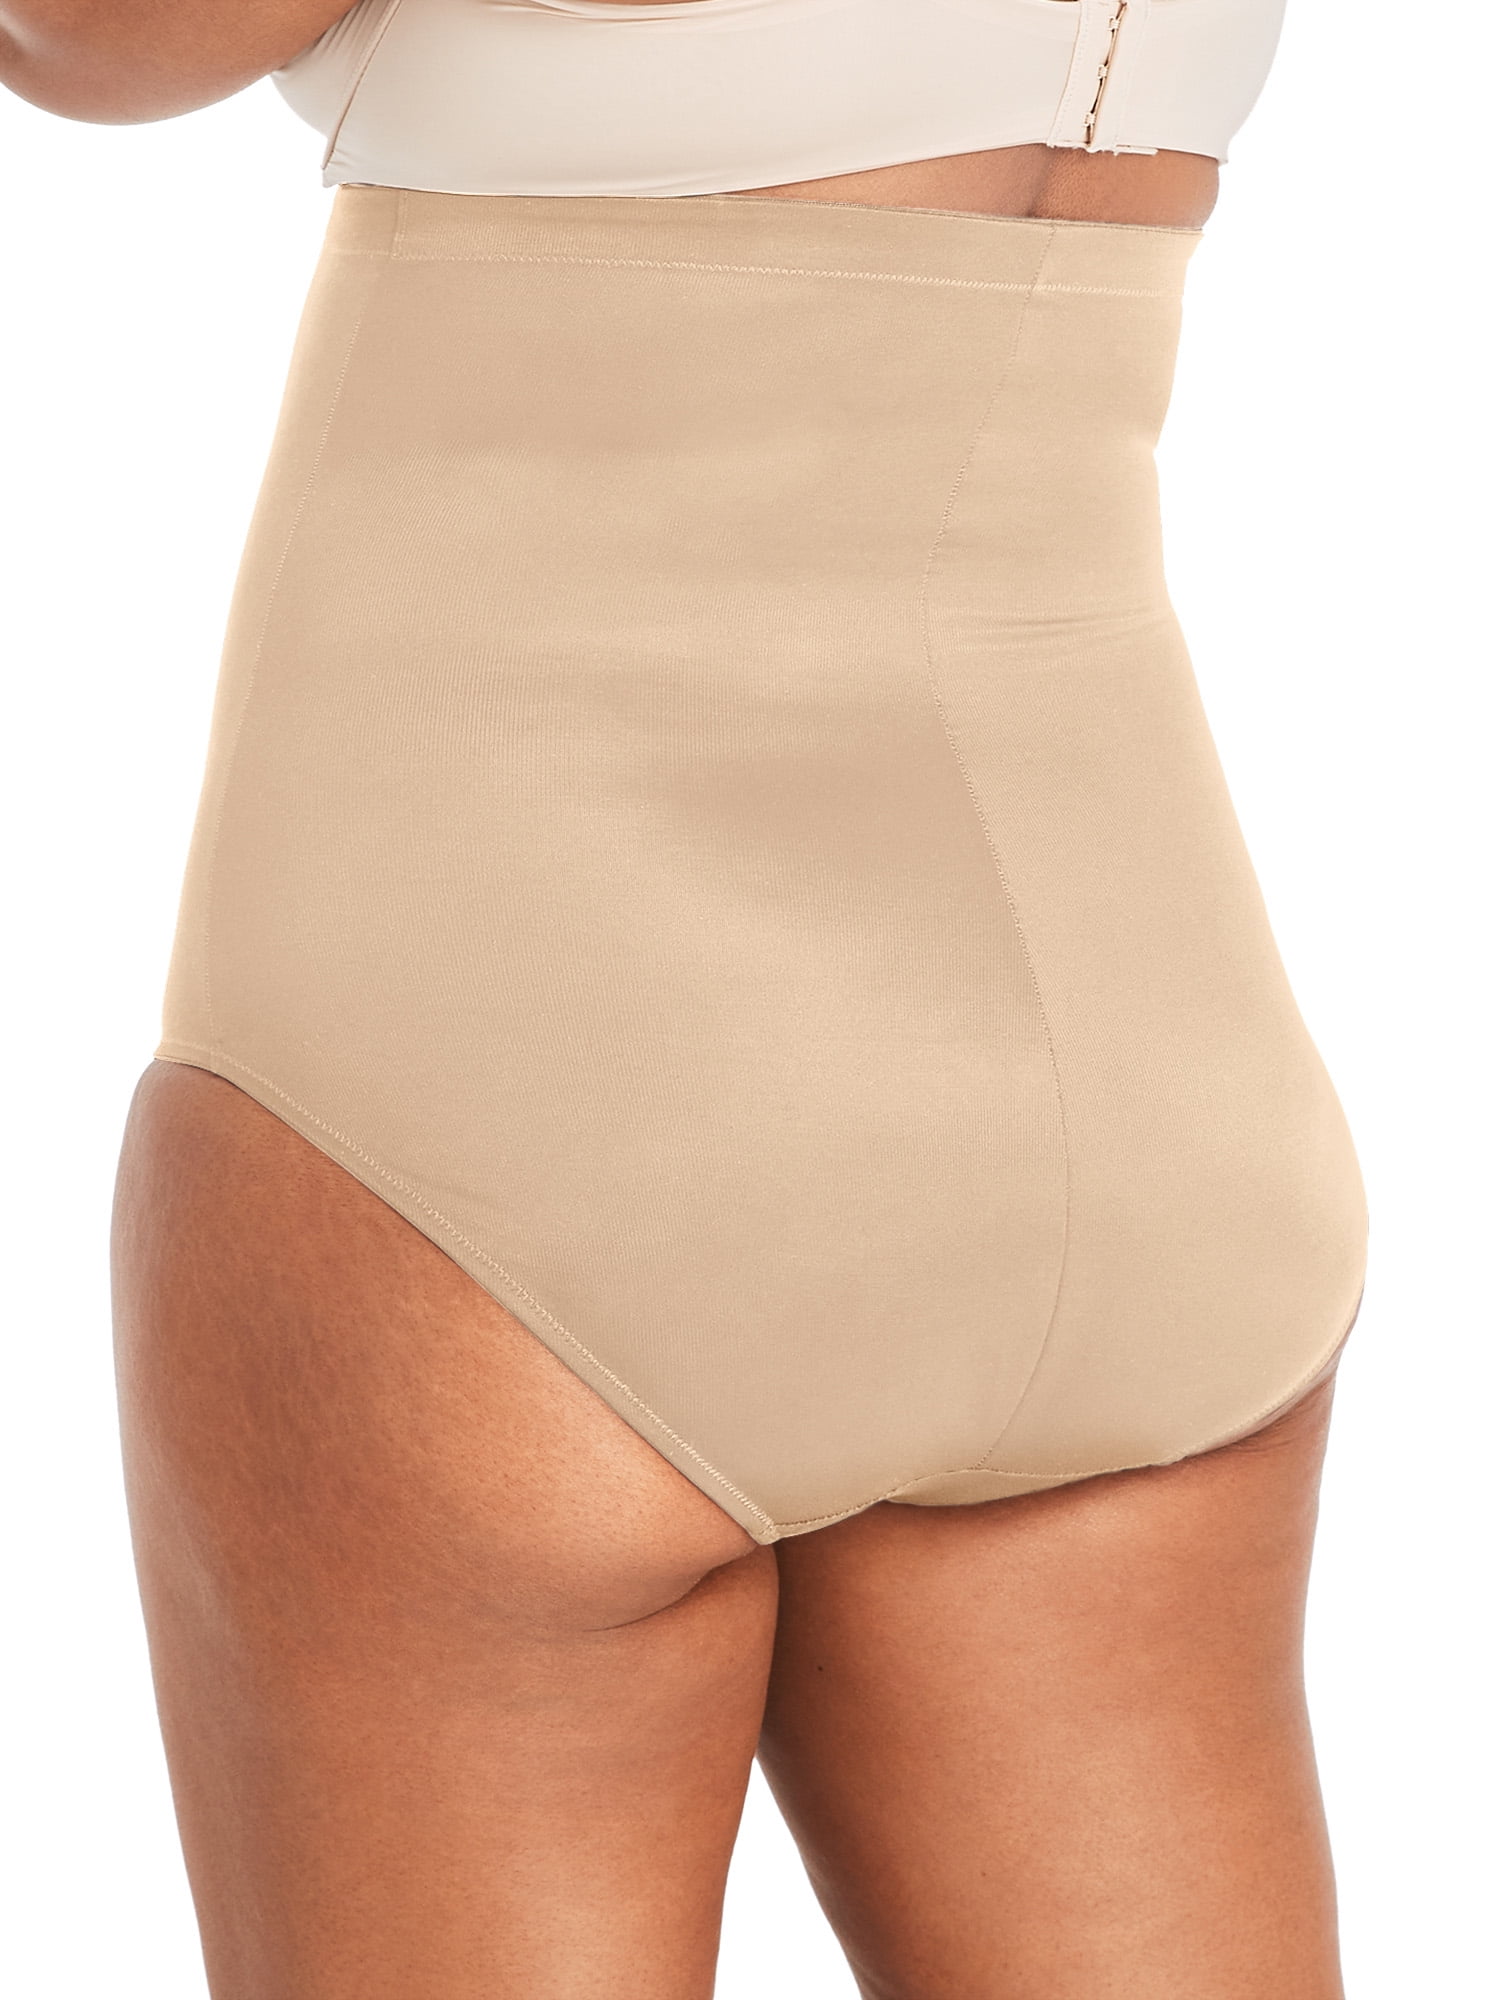 High Waisted Panty Girdle Large Maidenform Flexees Firm Panel Hold Vintage  Shapewear